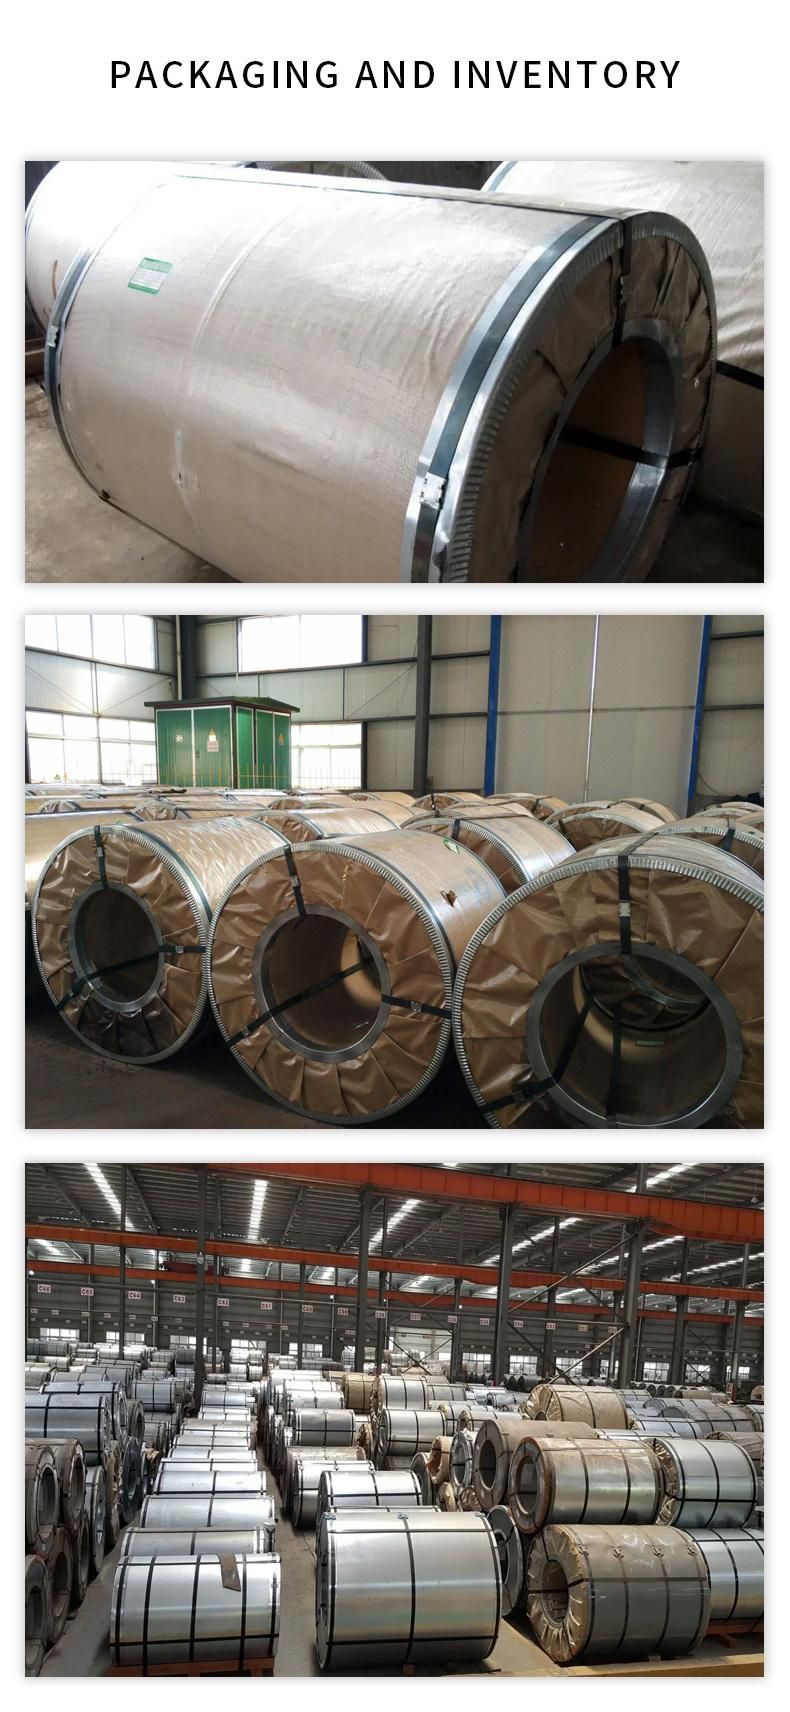 Ss400 Ss41 Ss540 Ss490 Ss330 Hot Rolled Steel Coil A36 Ah36 Ah32 Dh36 Eh36 Fh36 Shipbuilding Steel Coil Steel Plate A36 Ah36 Ah32 Dh36 Eh36 Fh36 Shipbuilding